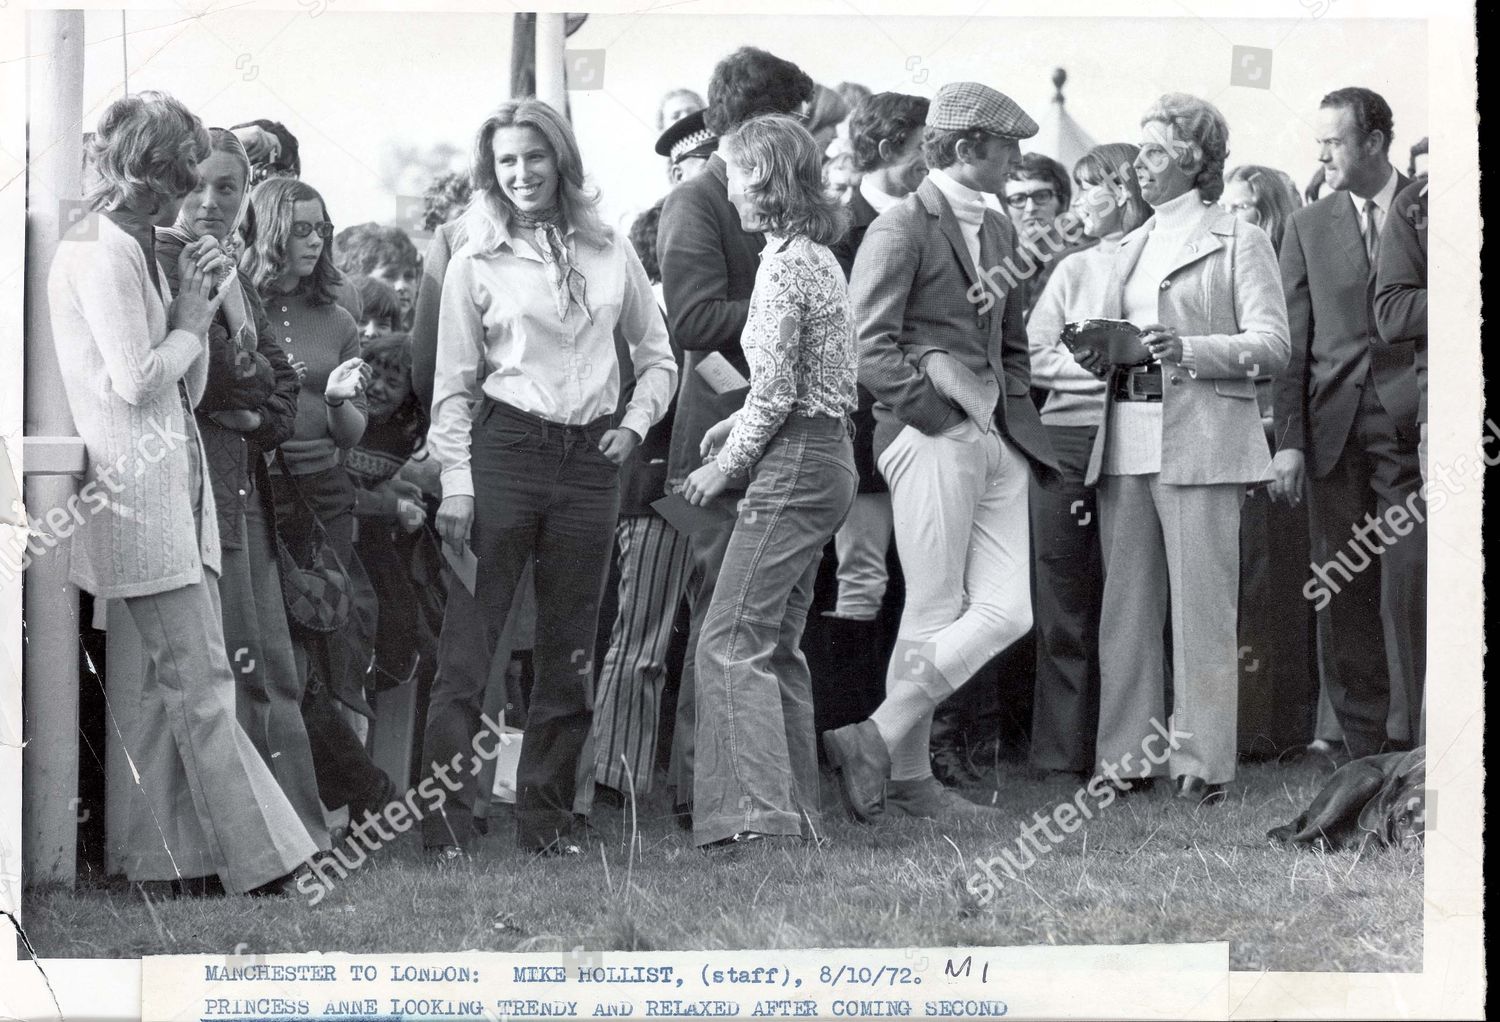 princess-anne-now-princess-royal-october-1972-princess-anne-looking-trendy-and-relaxed-after-coming-second-at-chatsworth-horse-trials-on-right-in-check-cap-is-friend-lt-mark-phillips-who-came-first-royalty-shutterstock-editorial-892372a.jpg